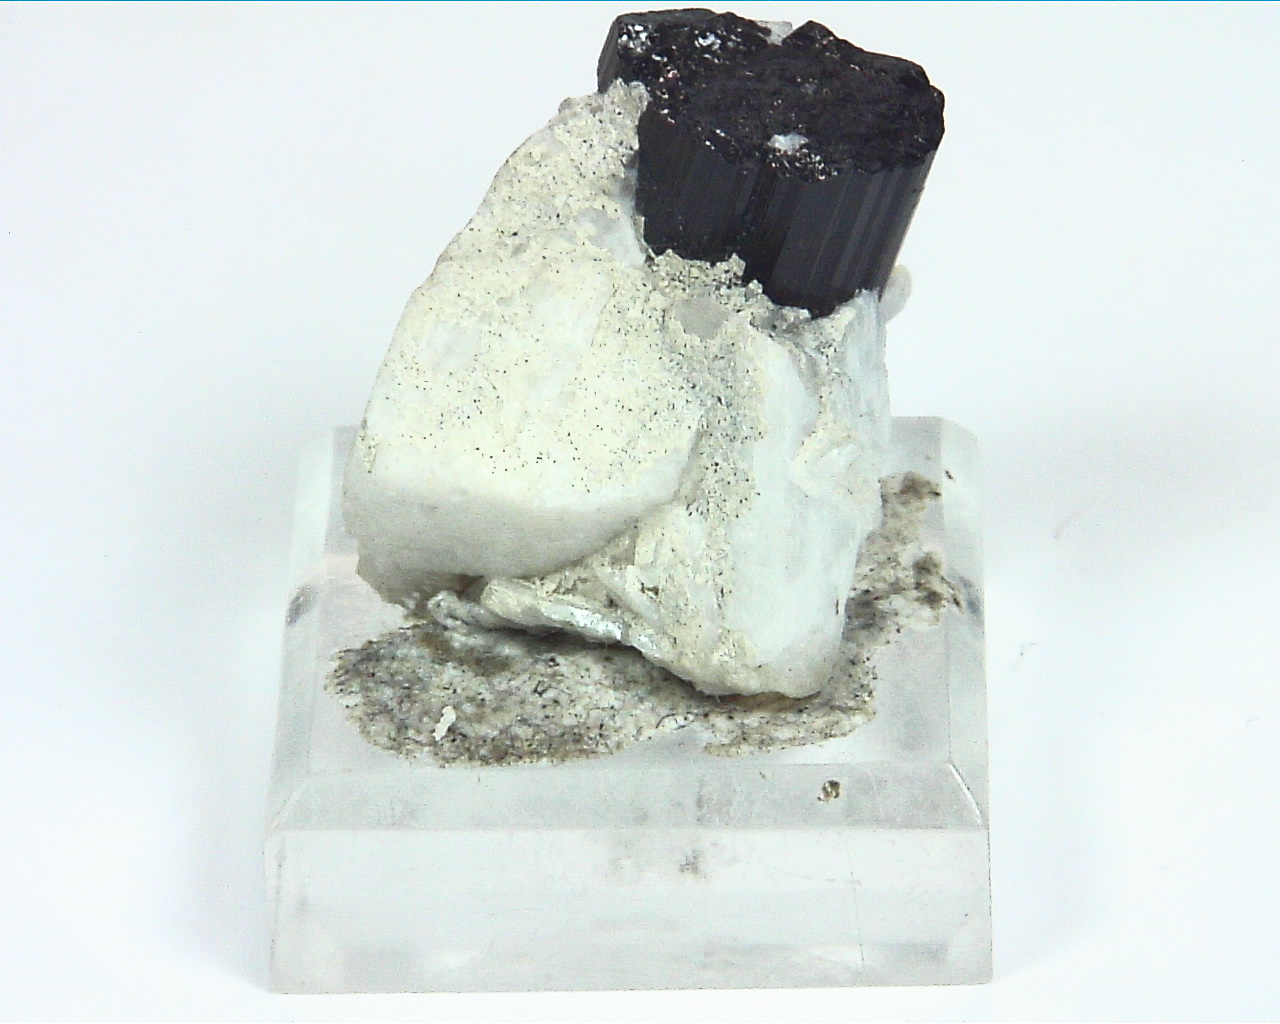 Quarts Crystal with Black Tourmaline Crystals,MS,786